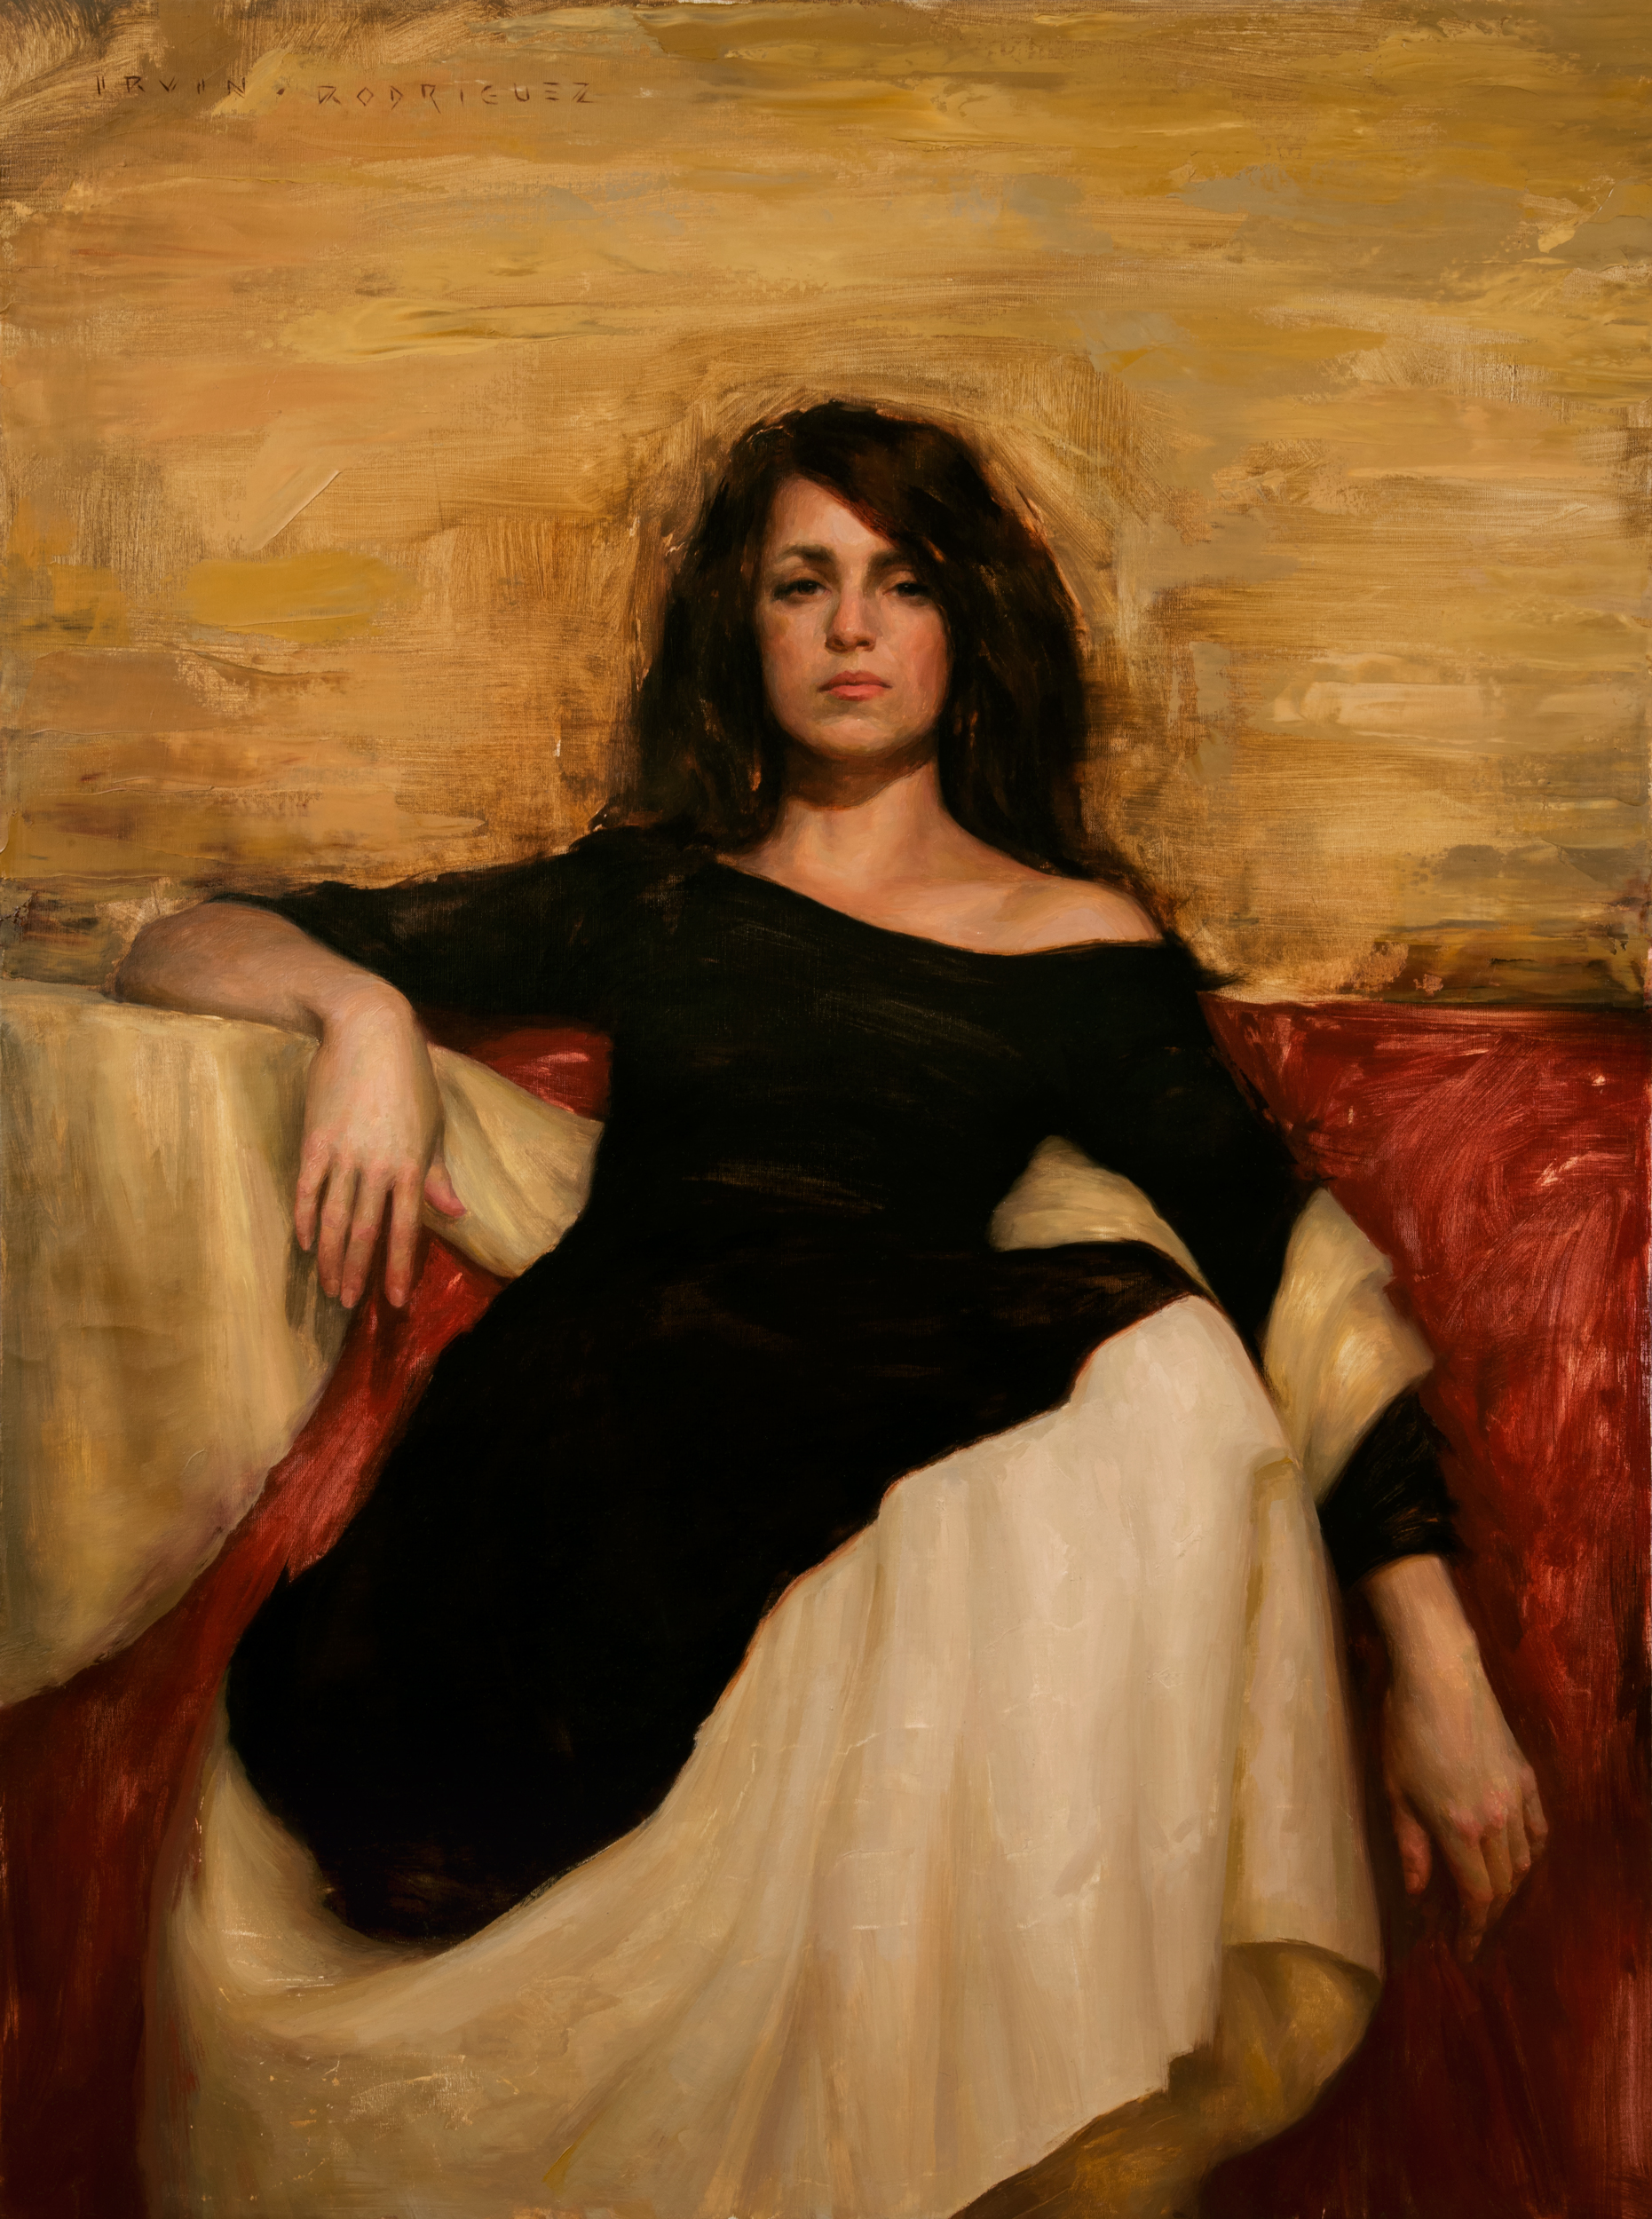 Irvin Rodriguez | Woman in Black | Oil on Linen | 40 x 30 inches or 101 ½ x 76 cm